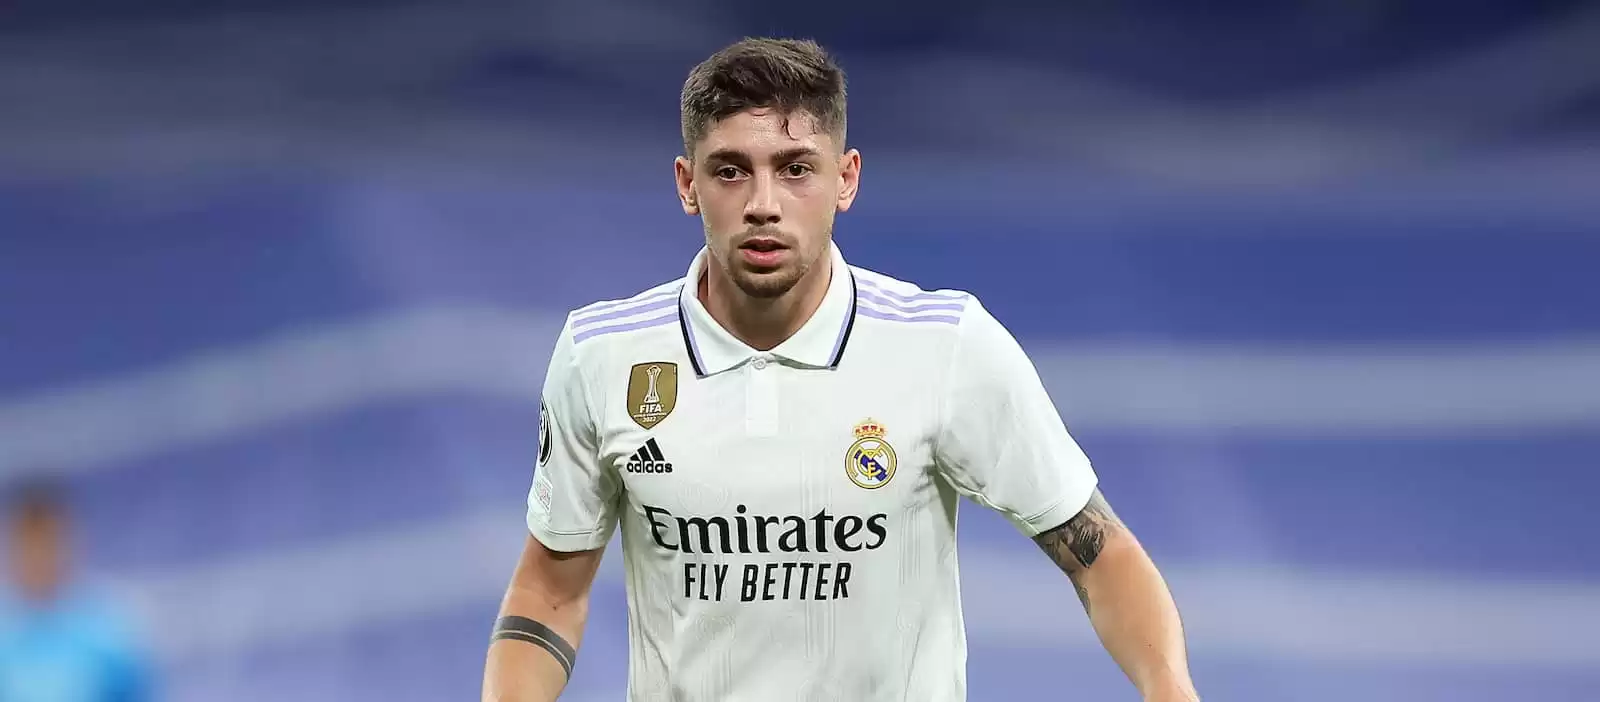 Real Madrid sets price for Federico Valverde, Manchester United among suitors